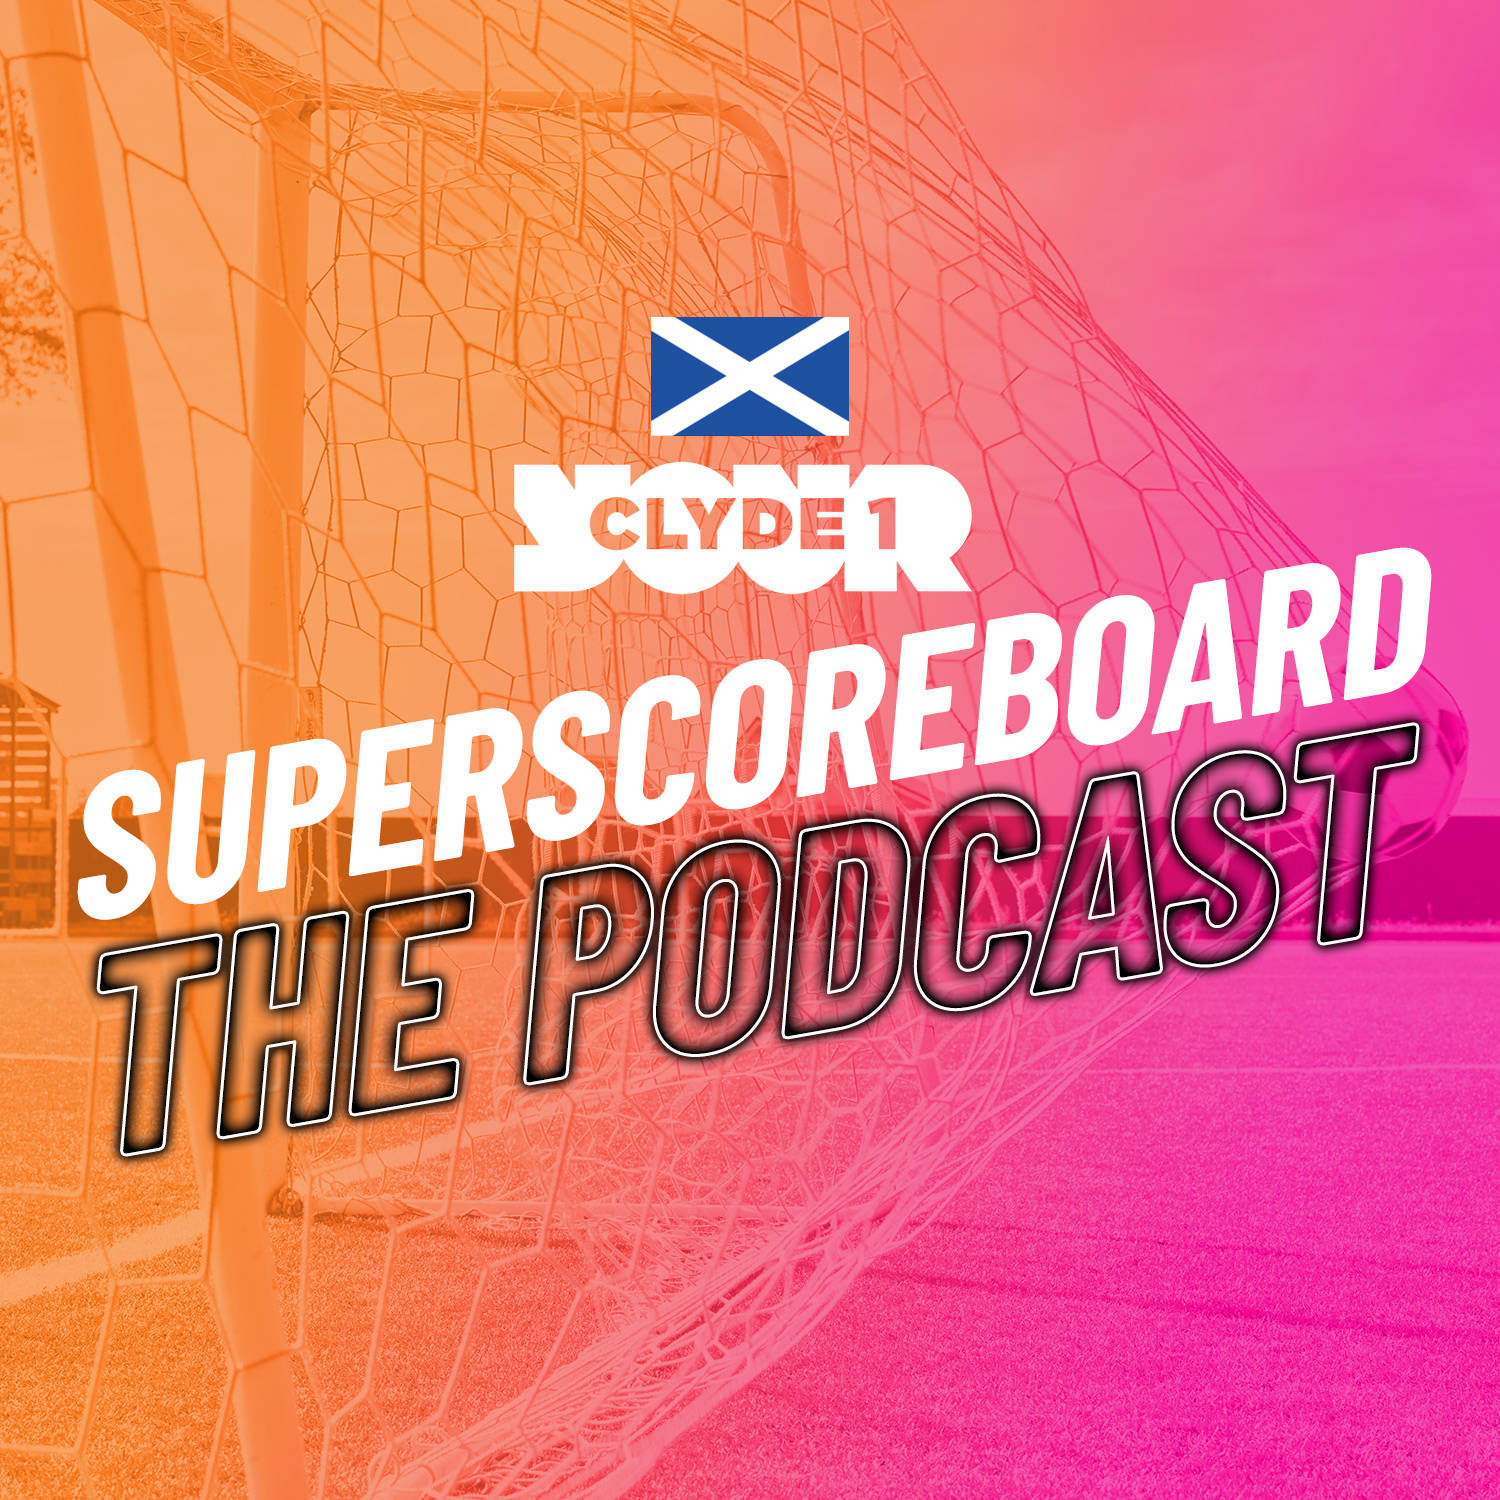 Friday 26th April Clyde 1 Superscoreboard